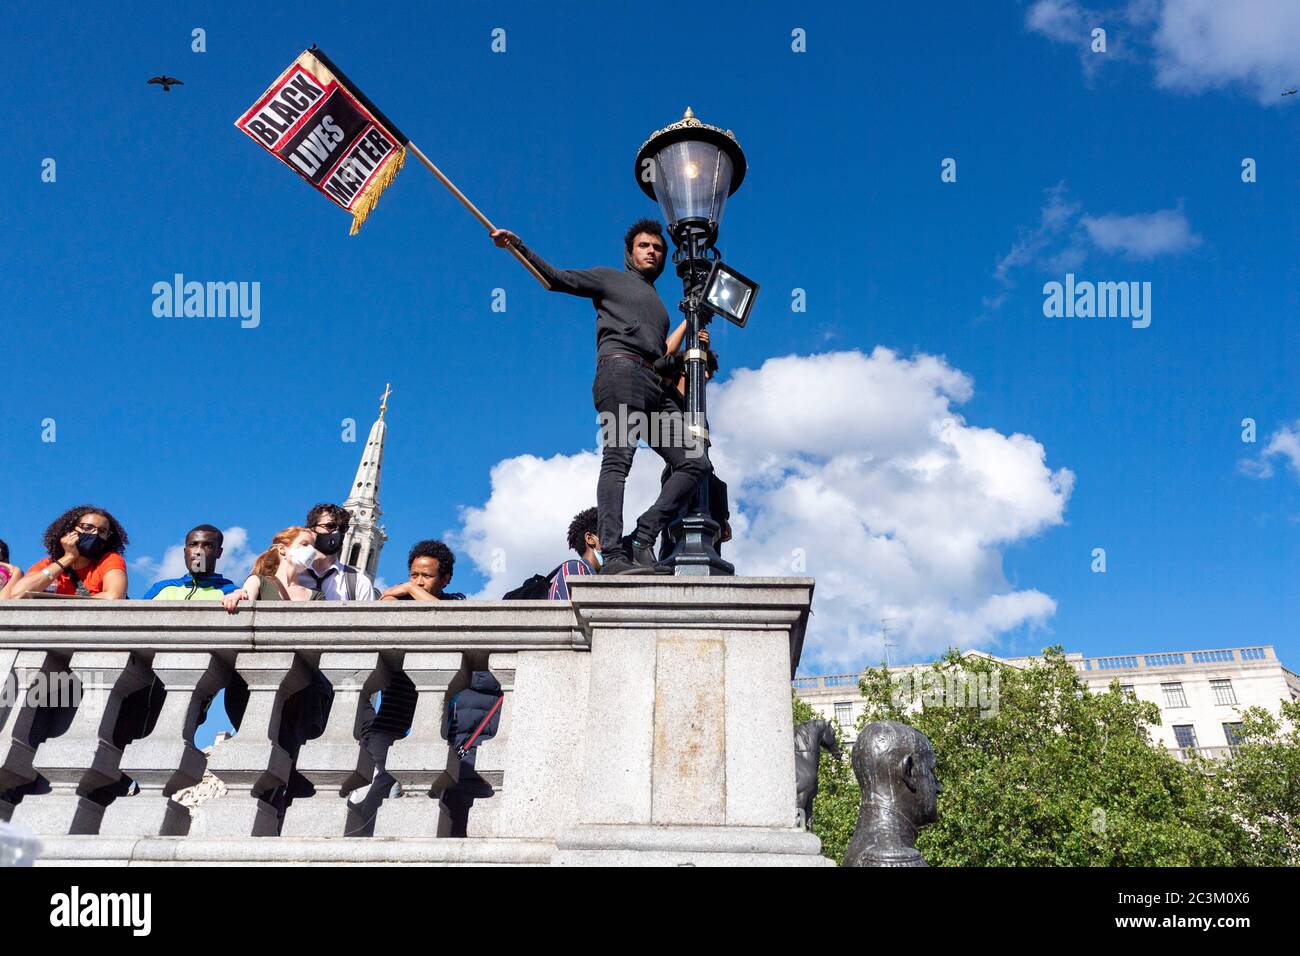 London, Britain. 20th June, 2020. Demonstrators take part in an anti-racism protest in London, Britain, on June 20, 2020. Credit: Ray Tang/Xinhua/Alamy Live News Stock Photo